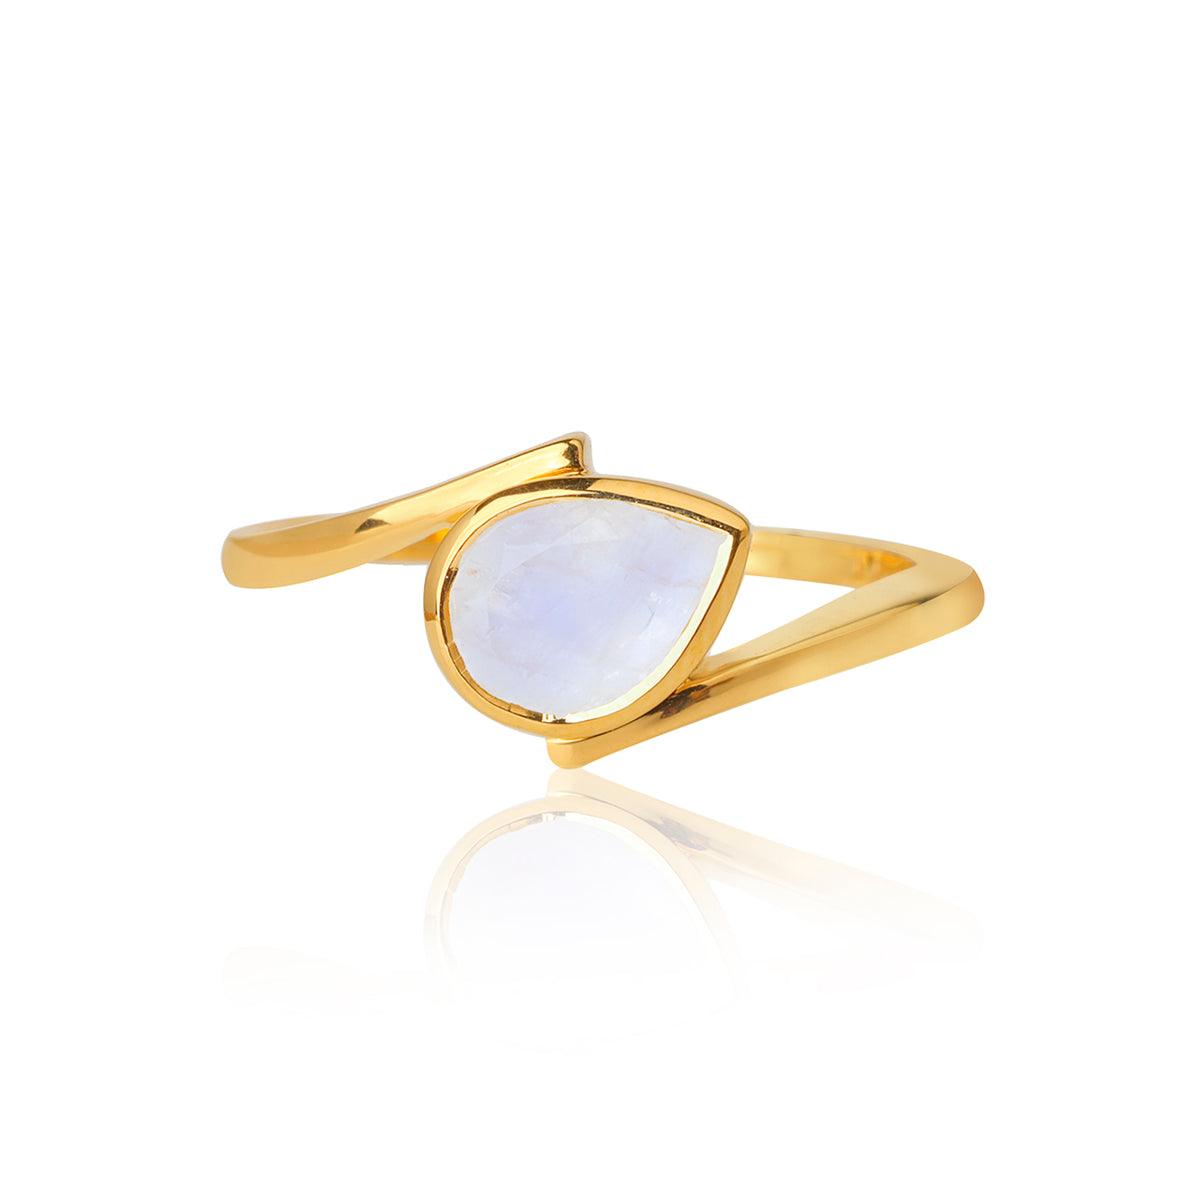 Moonstone Solitaire Ring in Gold Over 925 Sterling Silver Jewelry - YoTreasure